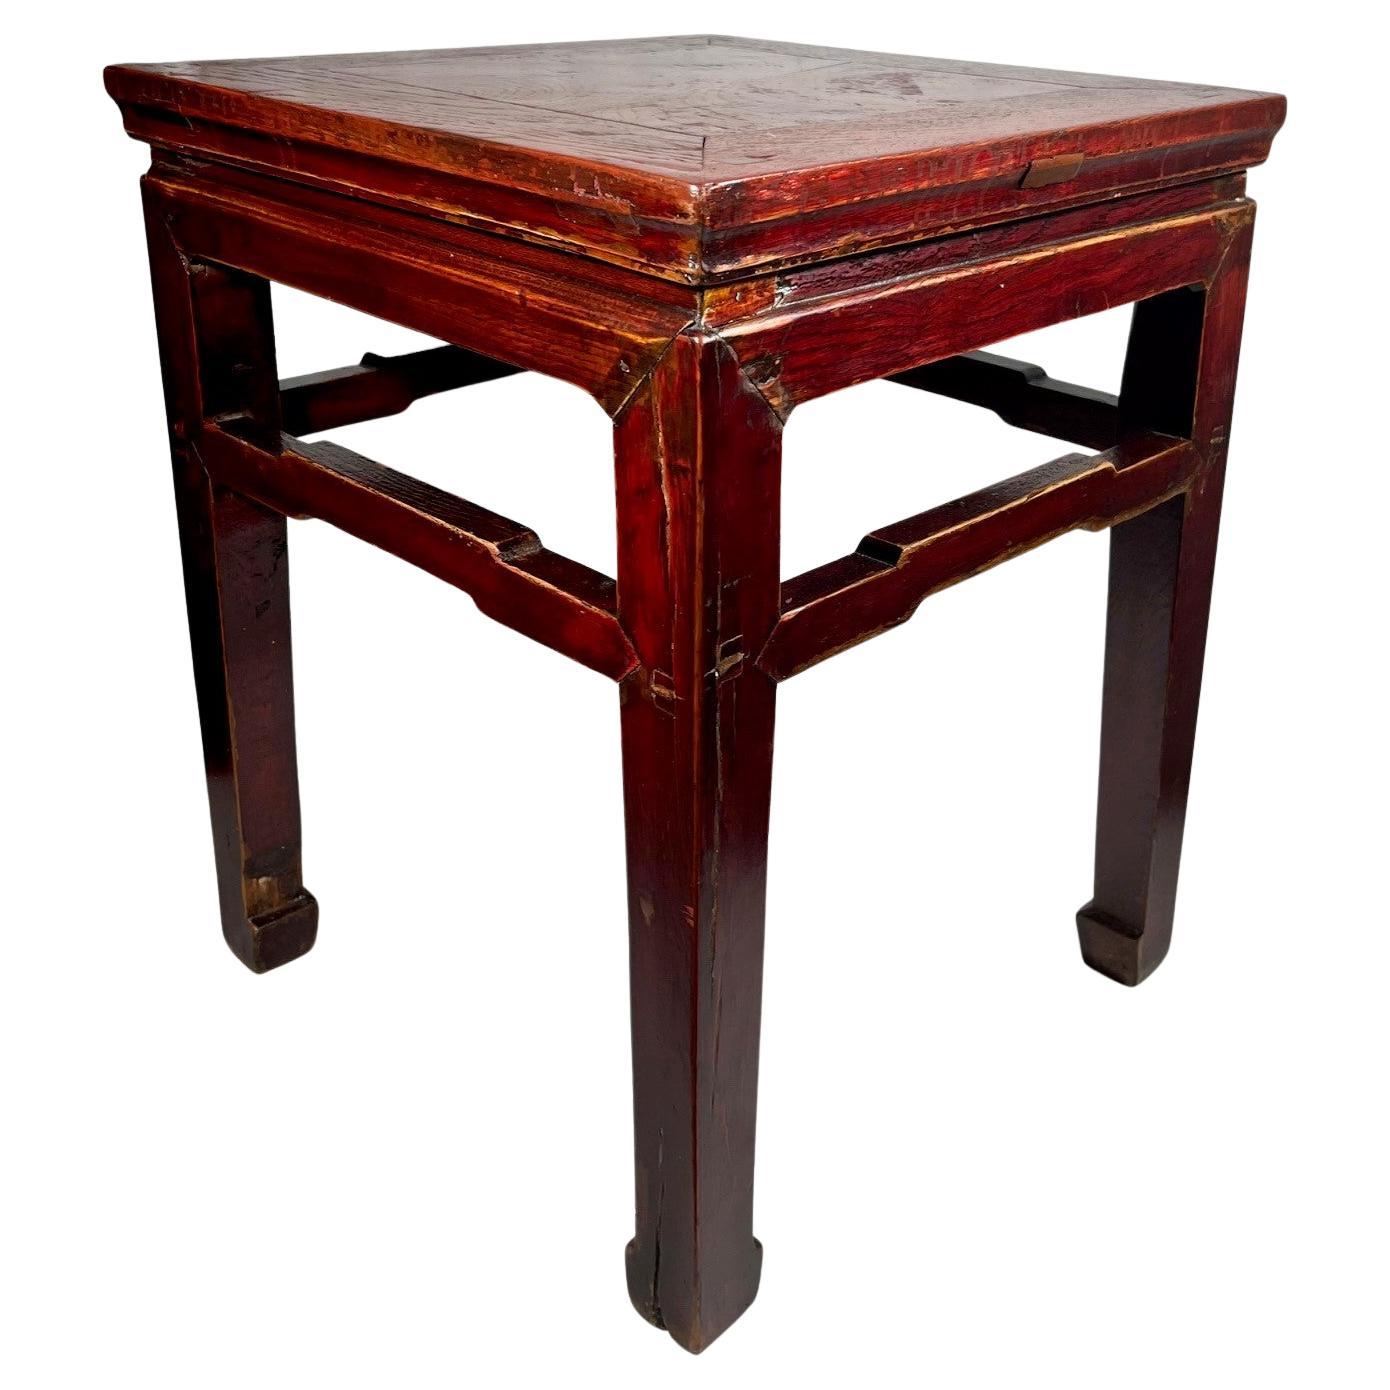 Chinese Ming Dynasty Style Side Table with Humpback Stretcher